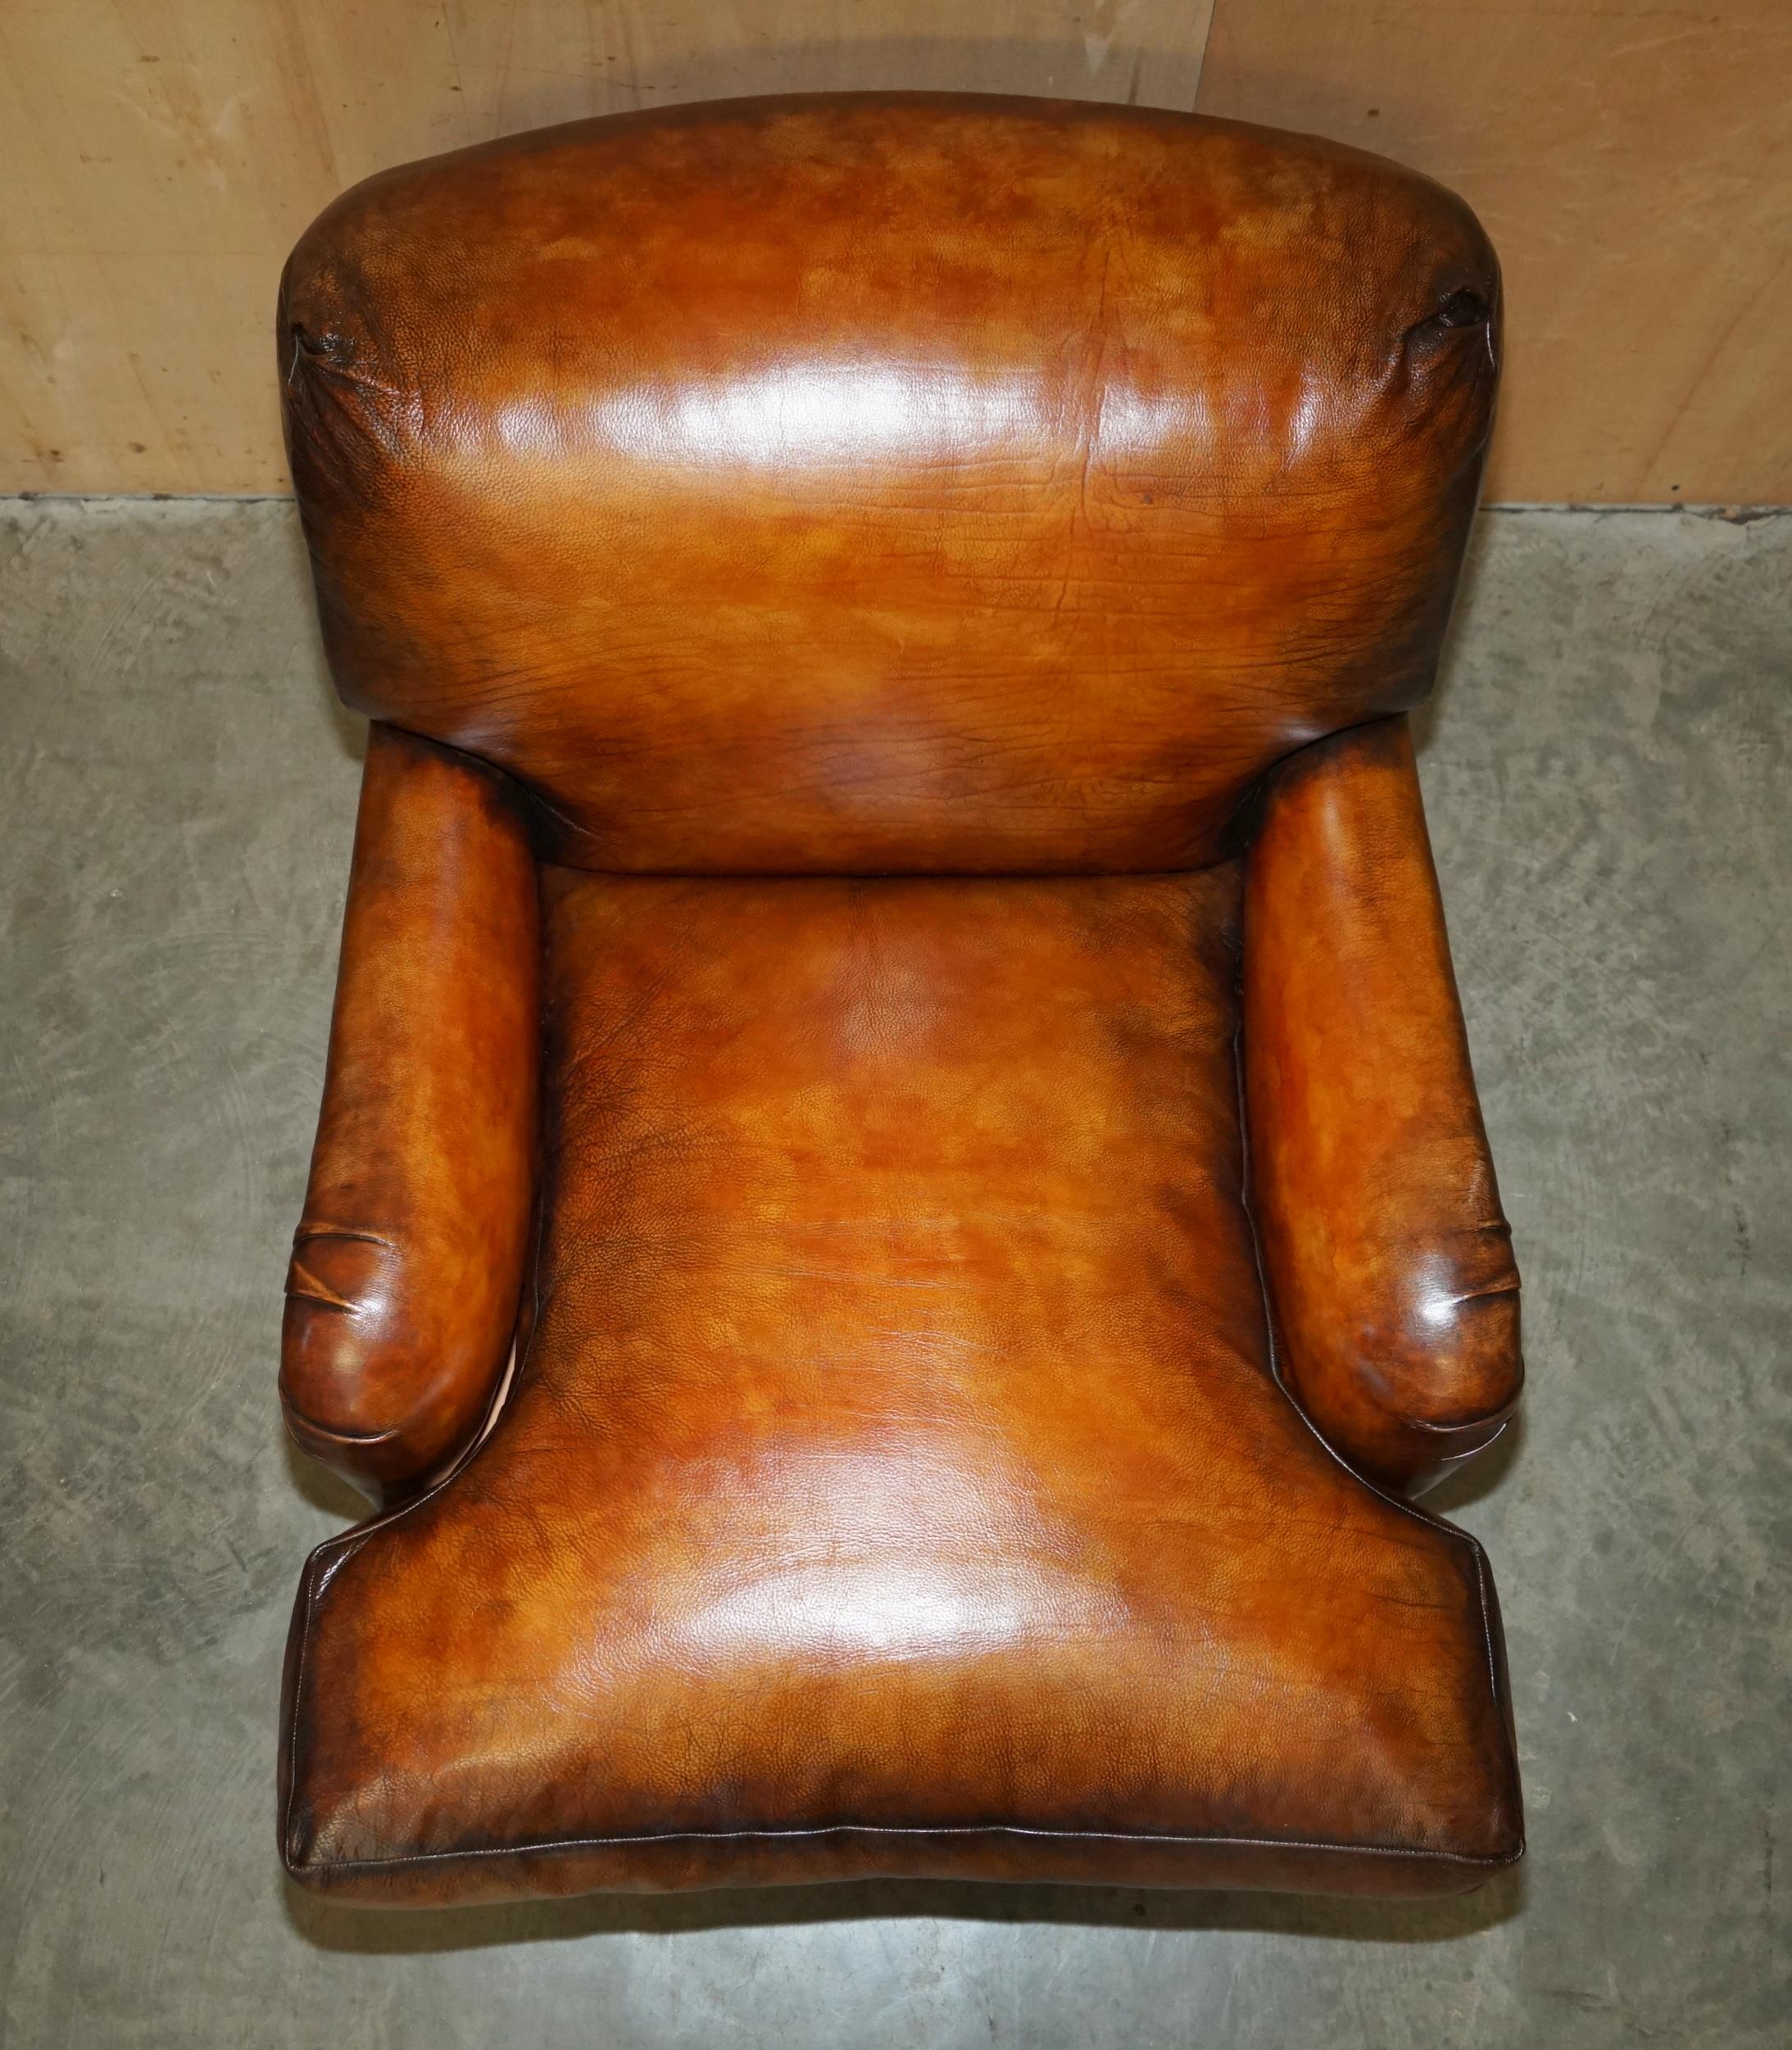 AIR OF EXTRA LARGE HOWARD & SON'S GEORGE SMITH Style BROWN LEATHER ARMCHAIRs (20. Jahrhundert) im Angebot